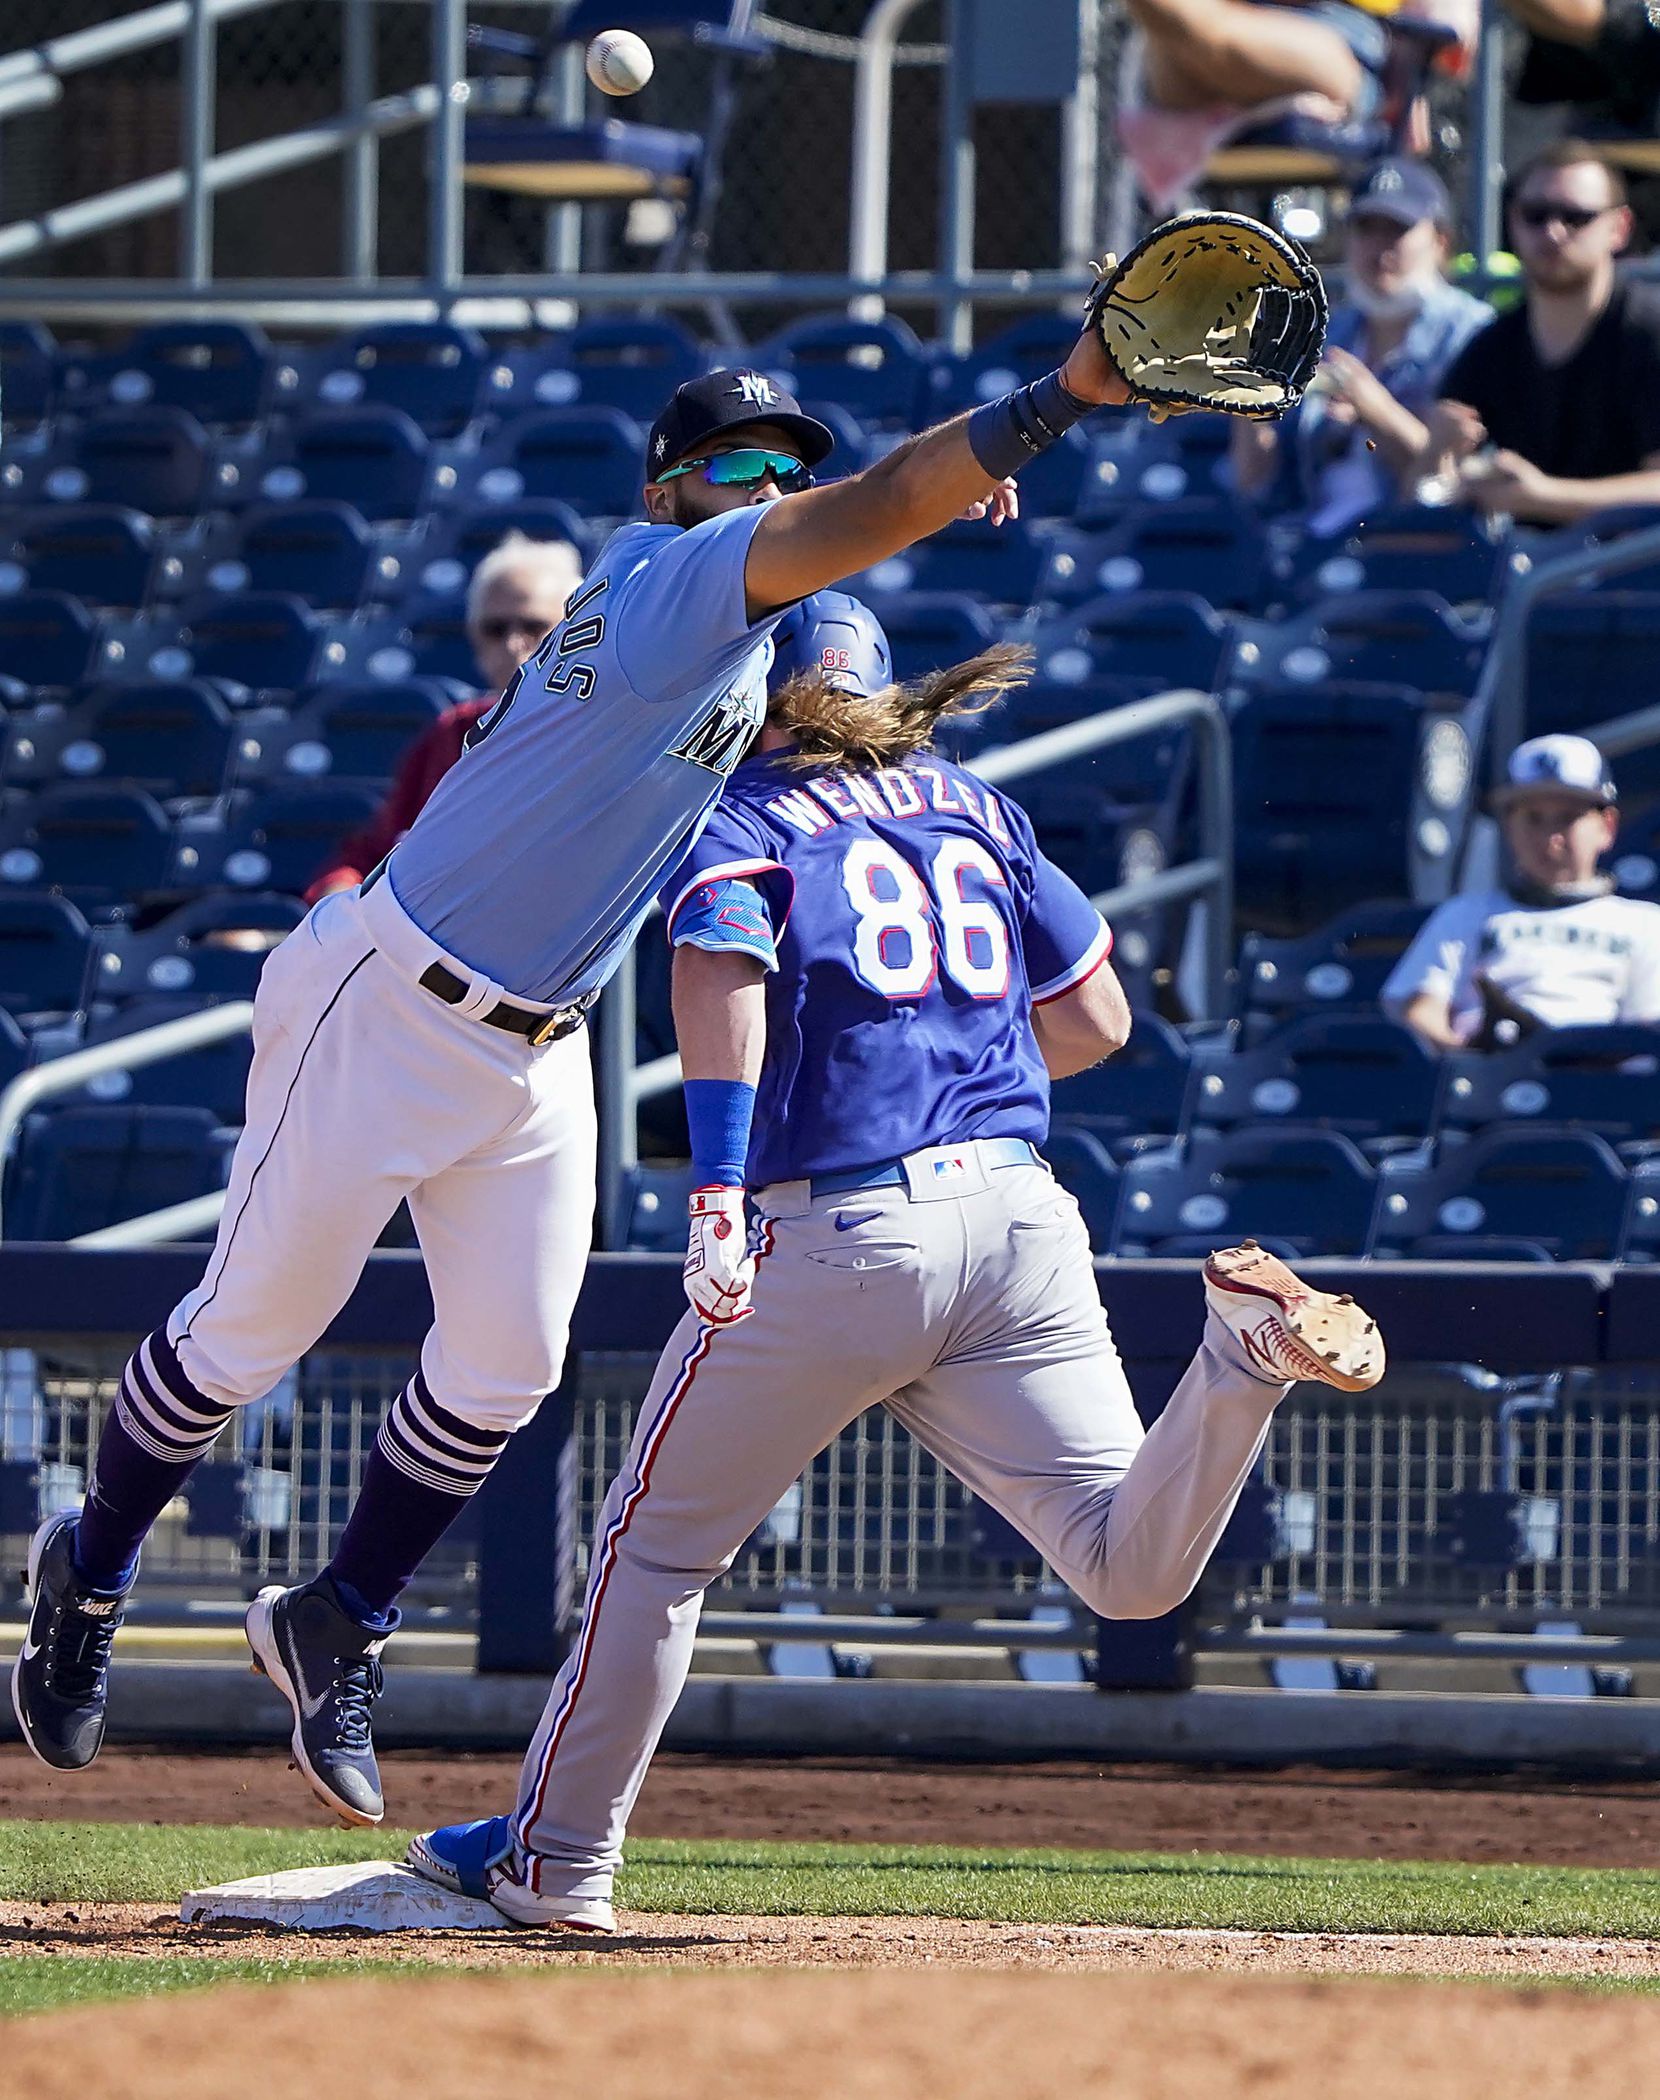 Texas Rangers infielder Davis Wendzel is safe at first base with a single as the ball gets away from Seattle Mariners first baseman Jose Marmolejos during the fifth inning of a spring training game at Peoria Sports Complex on Wednesday, March 10, 2021, in Peoria, Ariz.